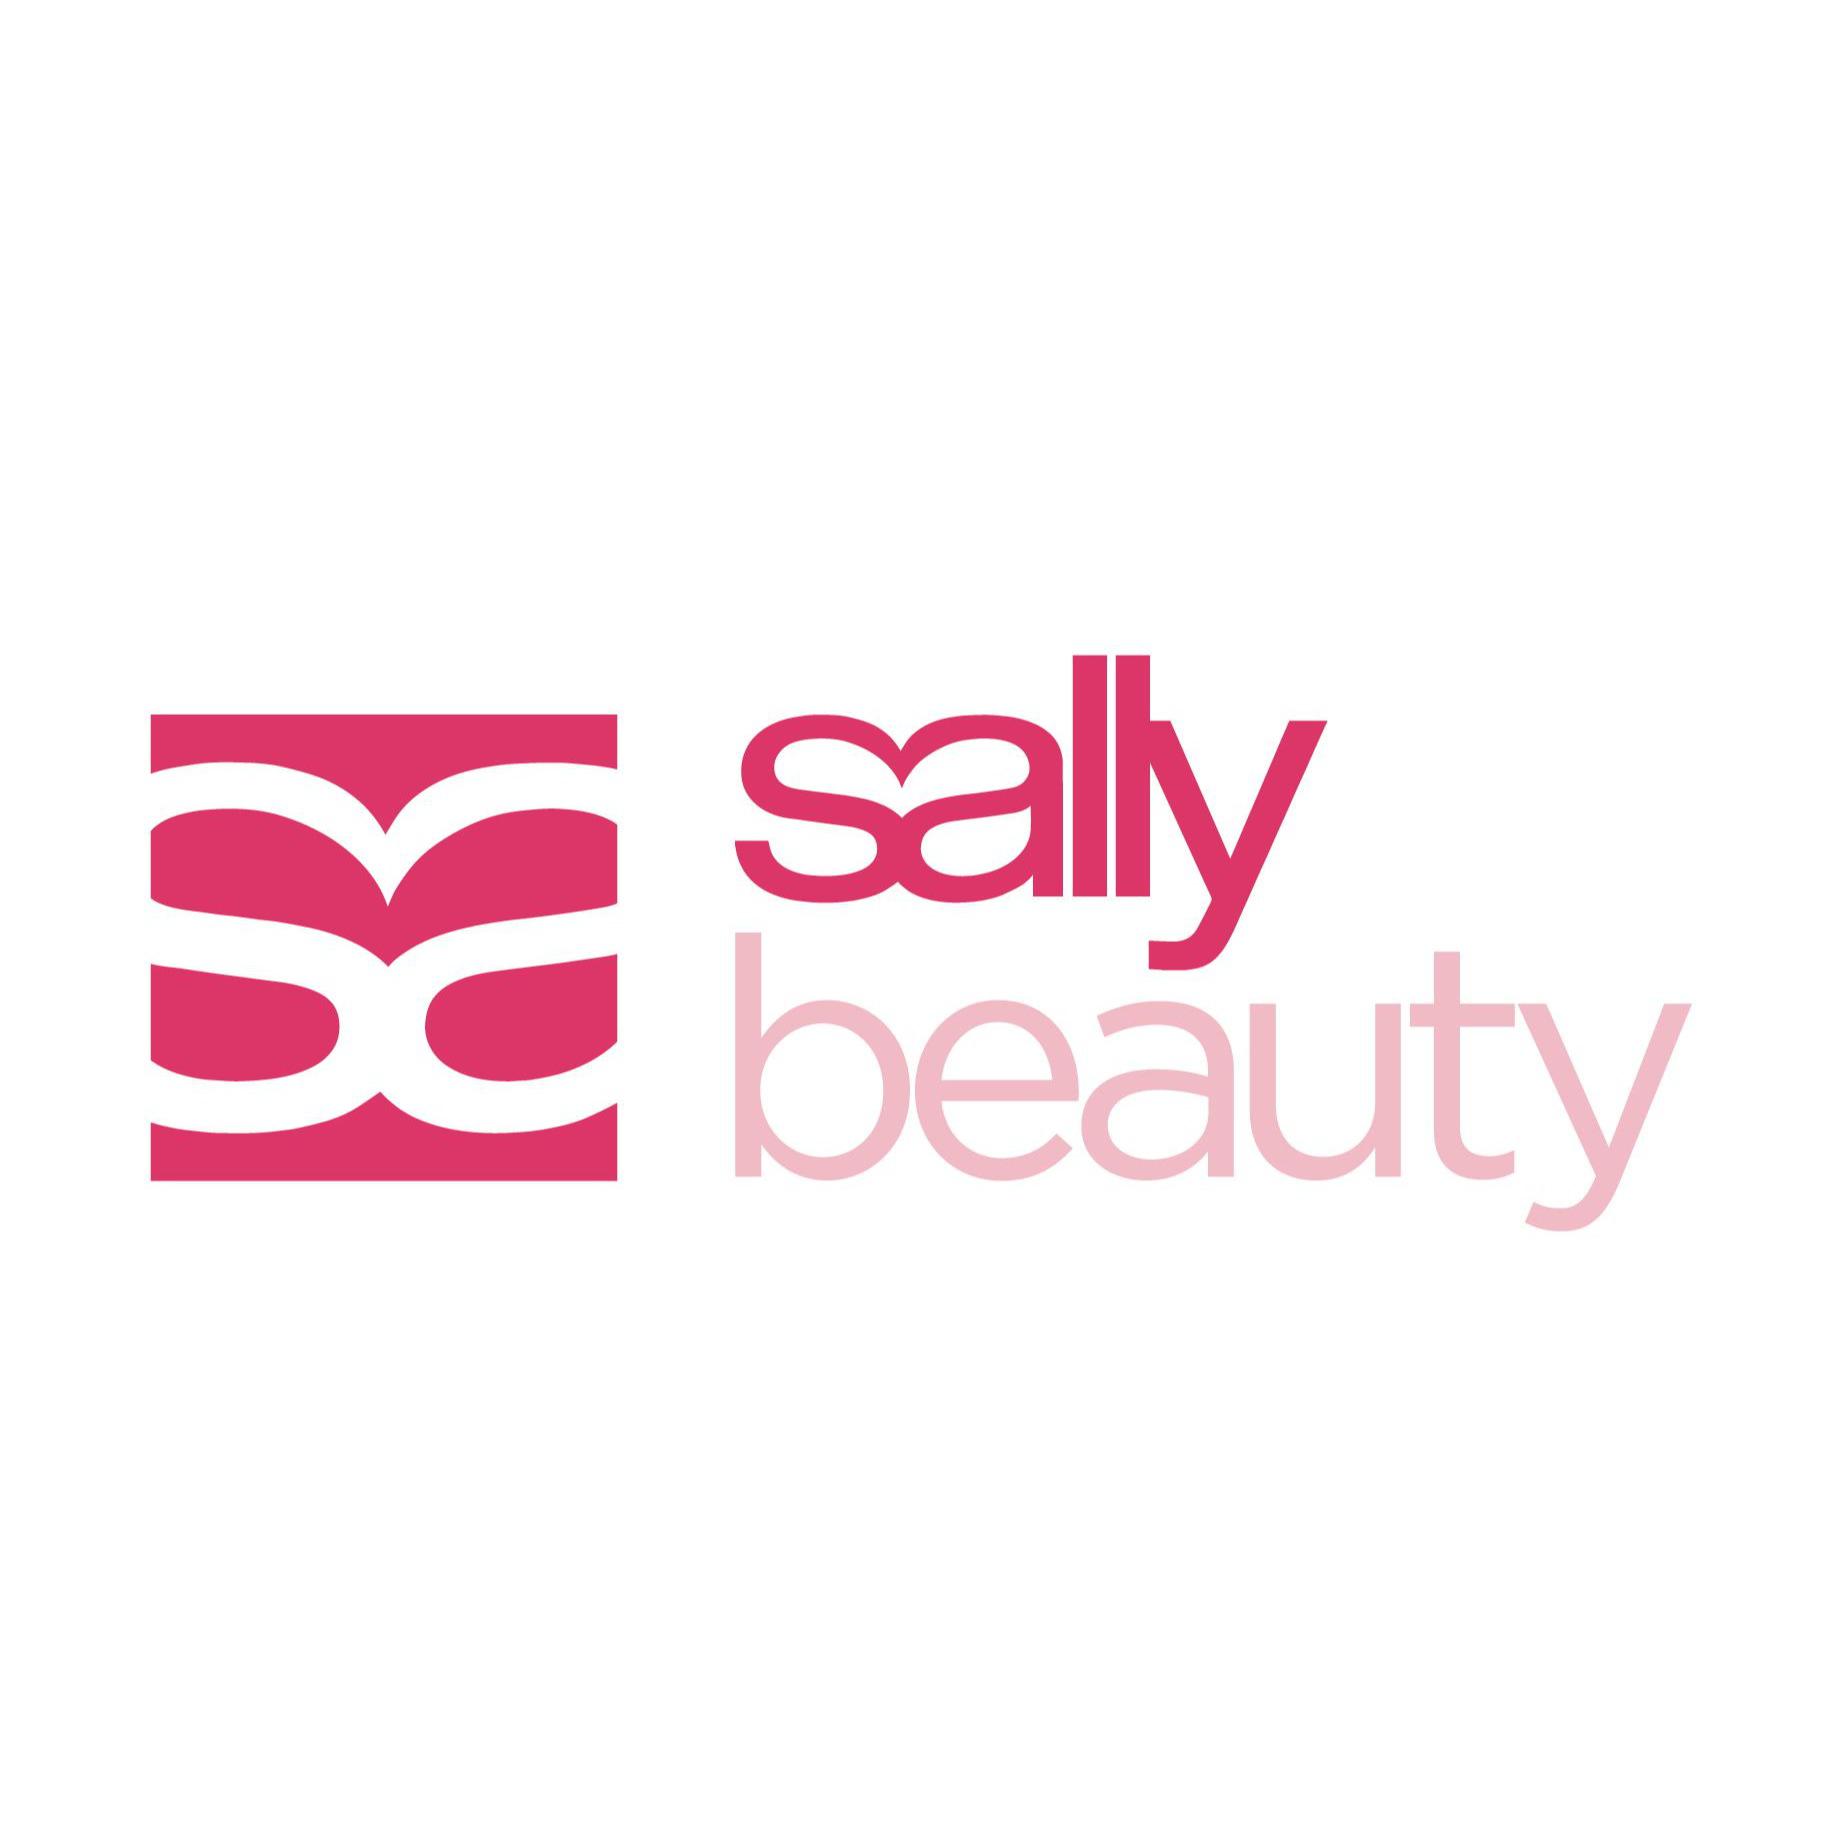 Sally Beauty - Kettering, Northamptonshire NN16 8PS - 01536 510662 | ShowMeLocal.com